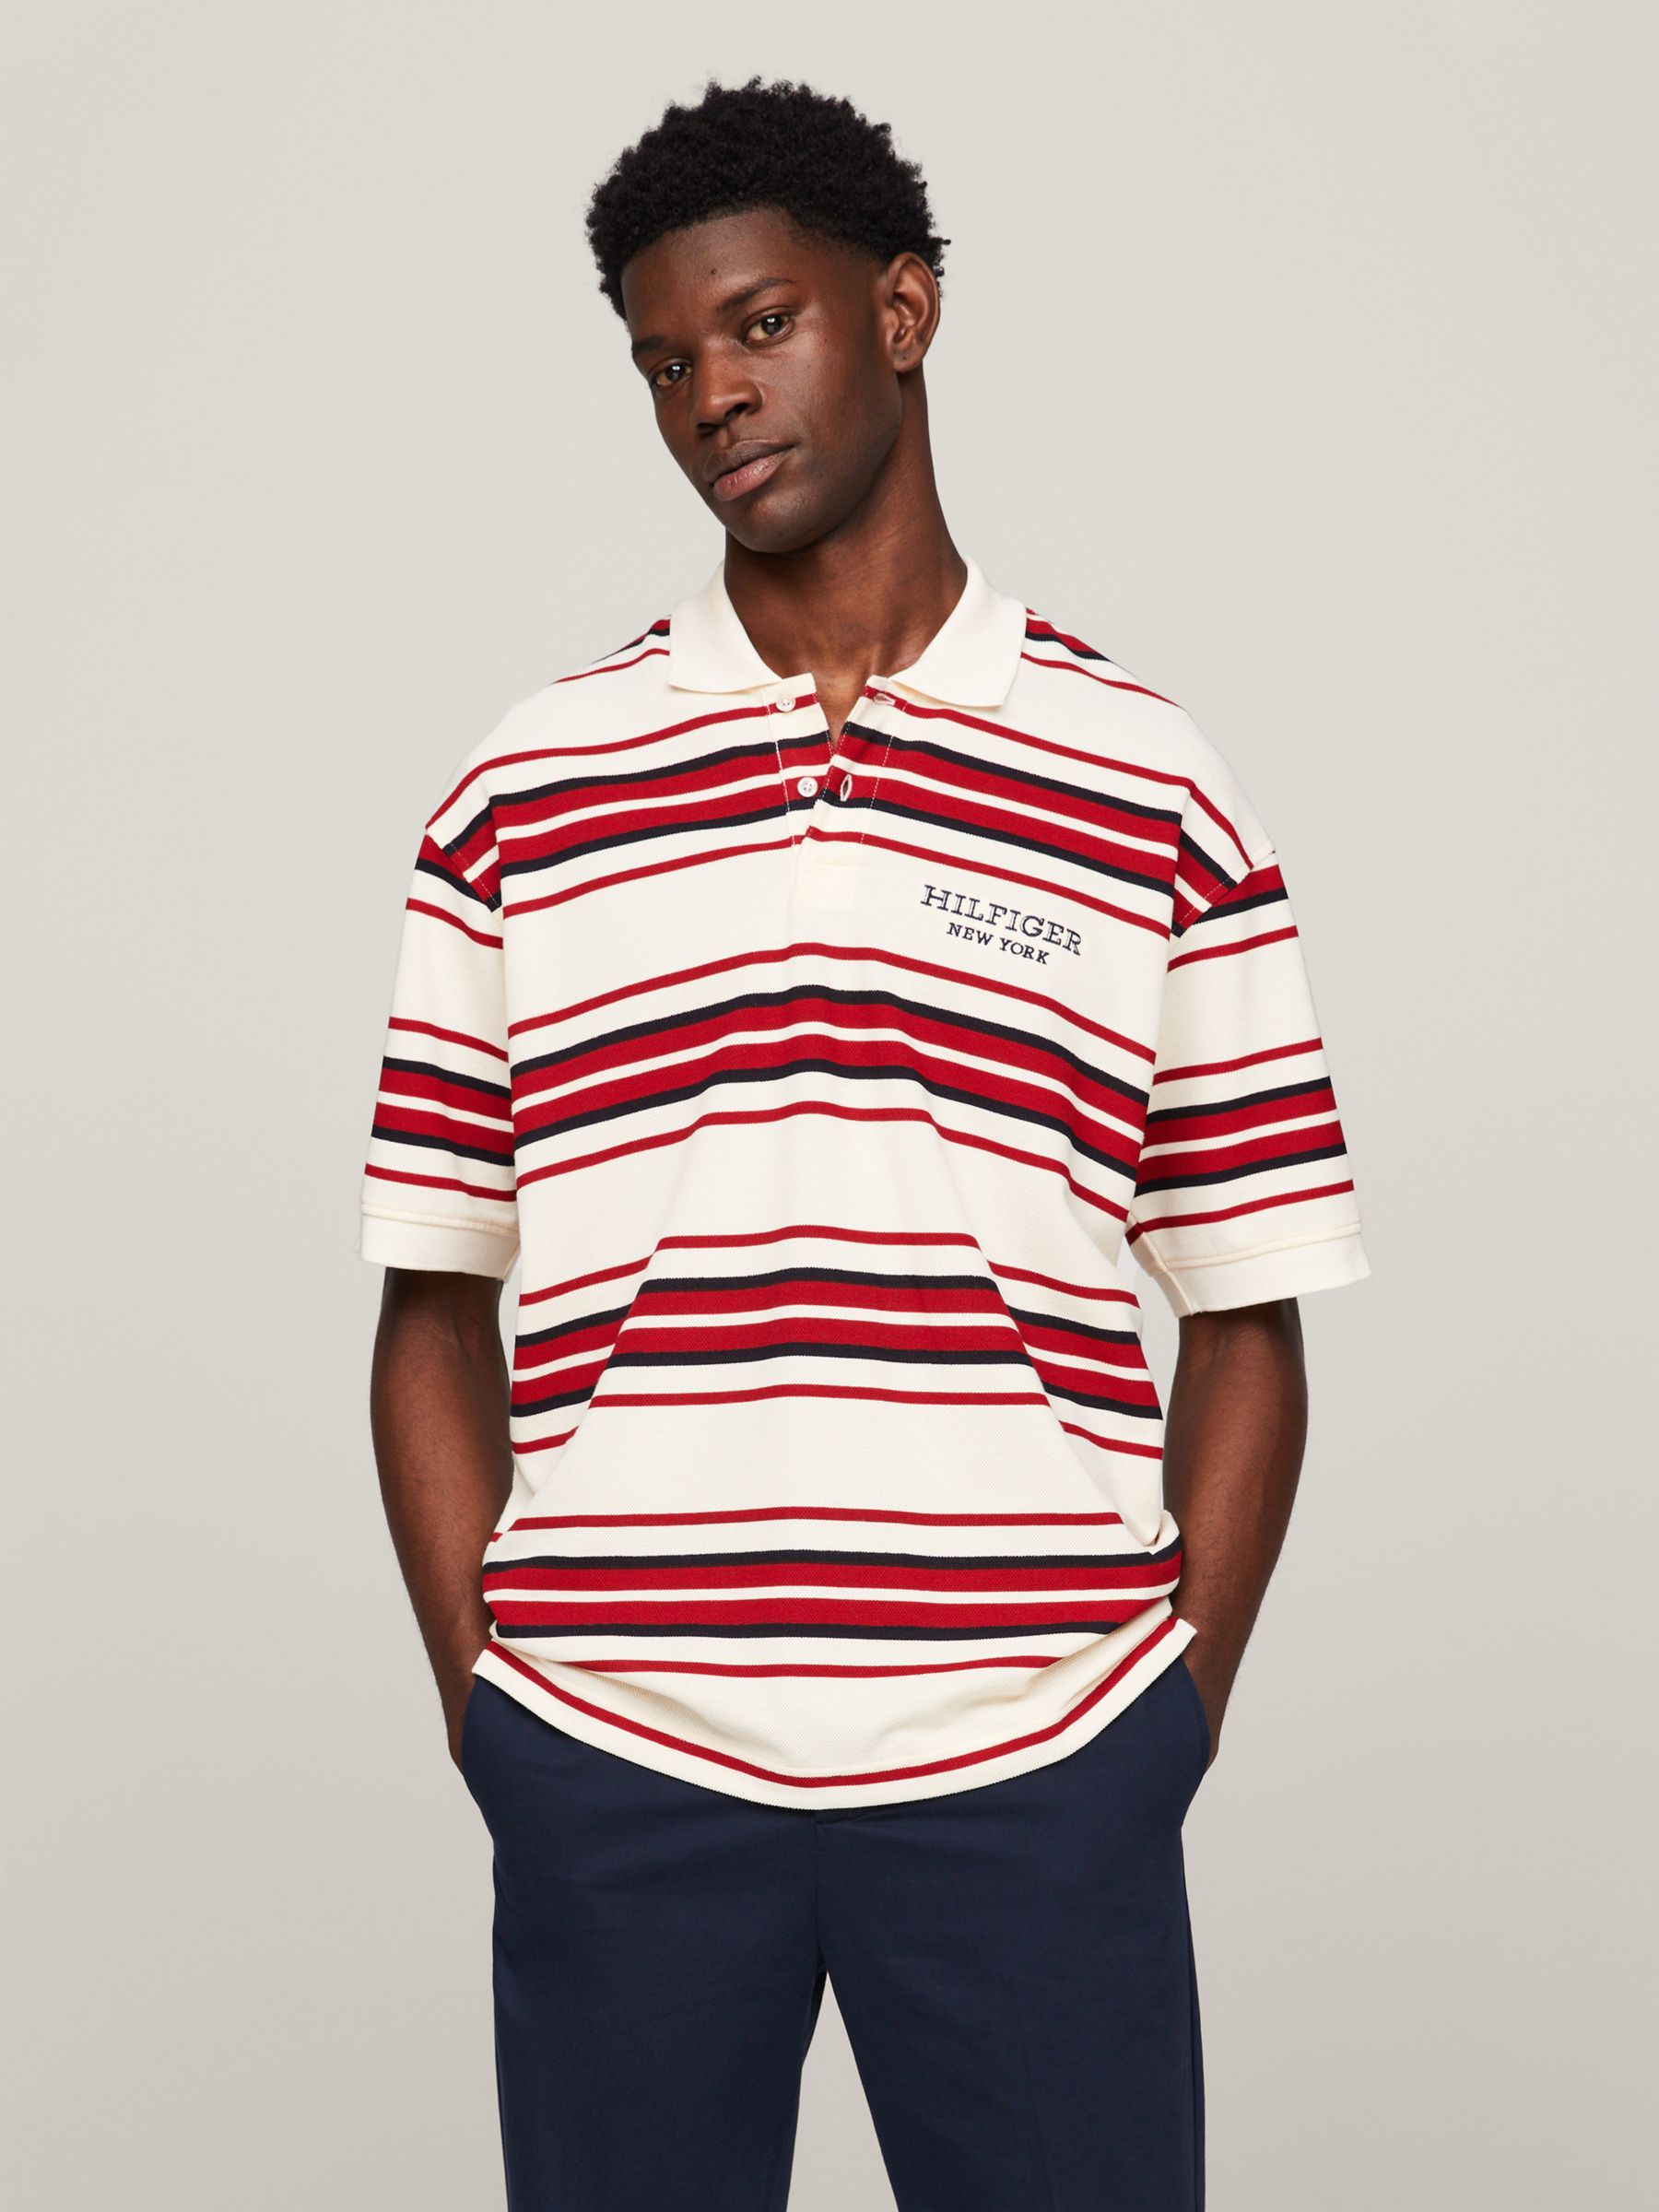 Tommy Hilfiger Stripe Short Sleeve Polo Top, Calico, L